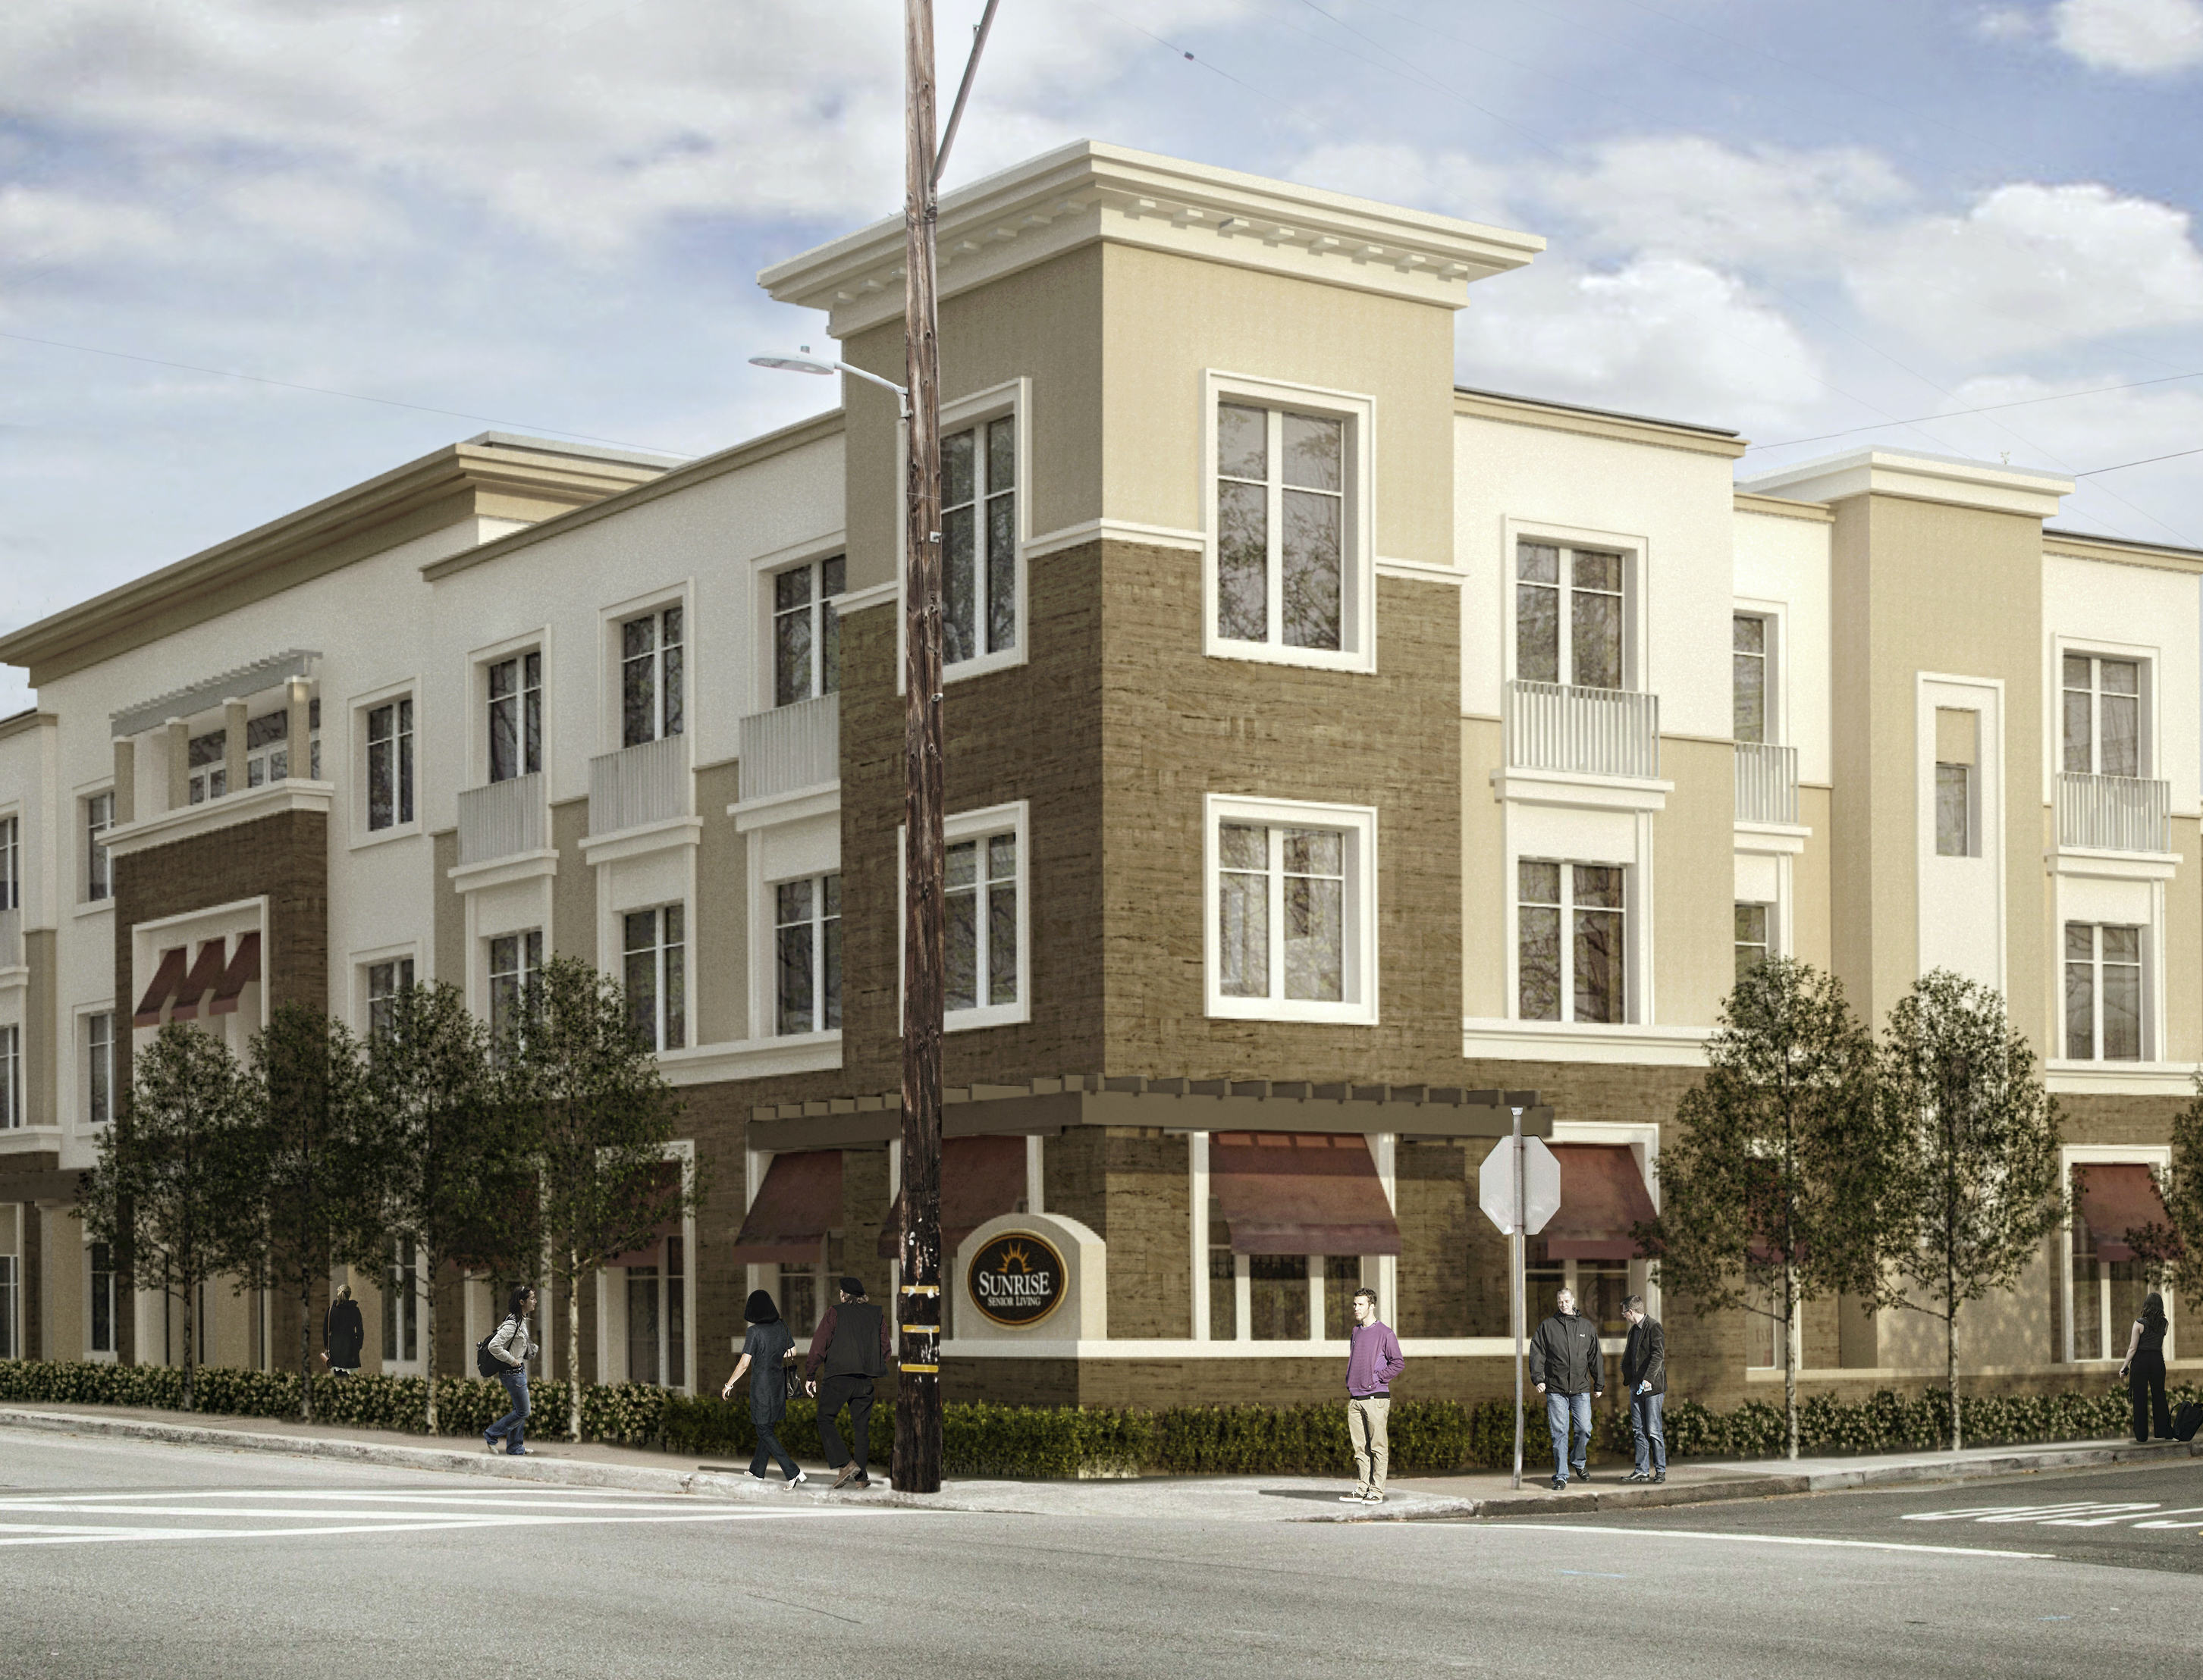 Sunrise Senior Living Opens New Assisted Living Community in Heart of Silicon Valley Neighborhood of Redwood City